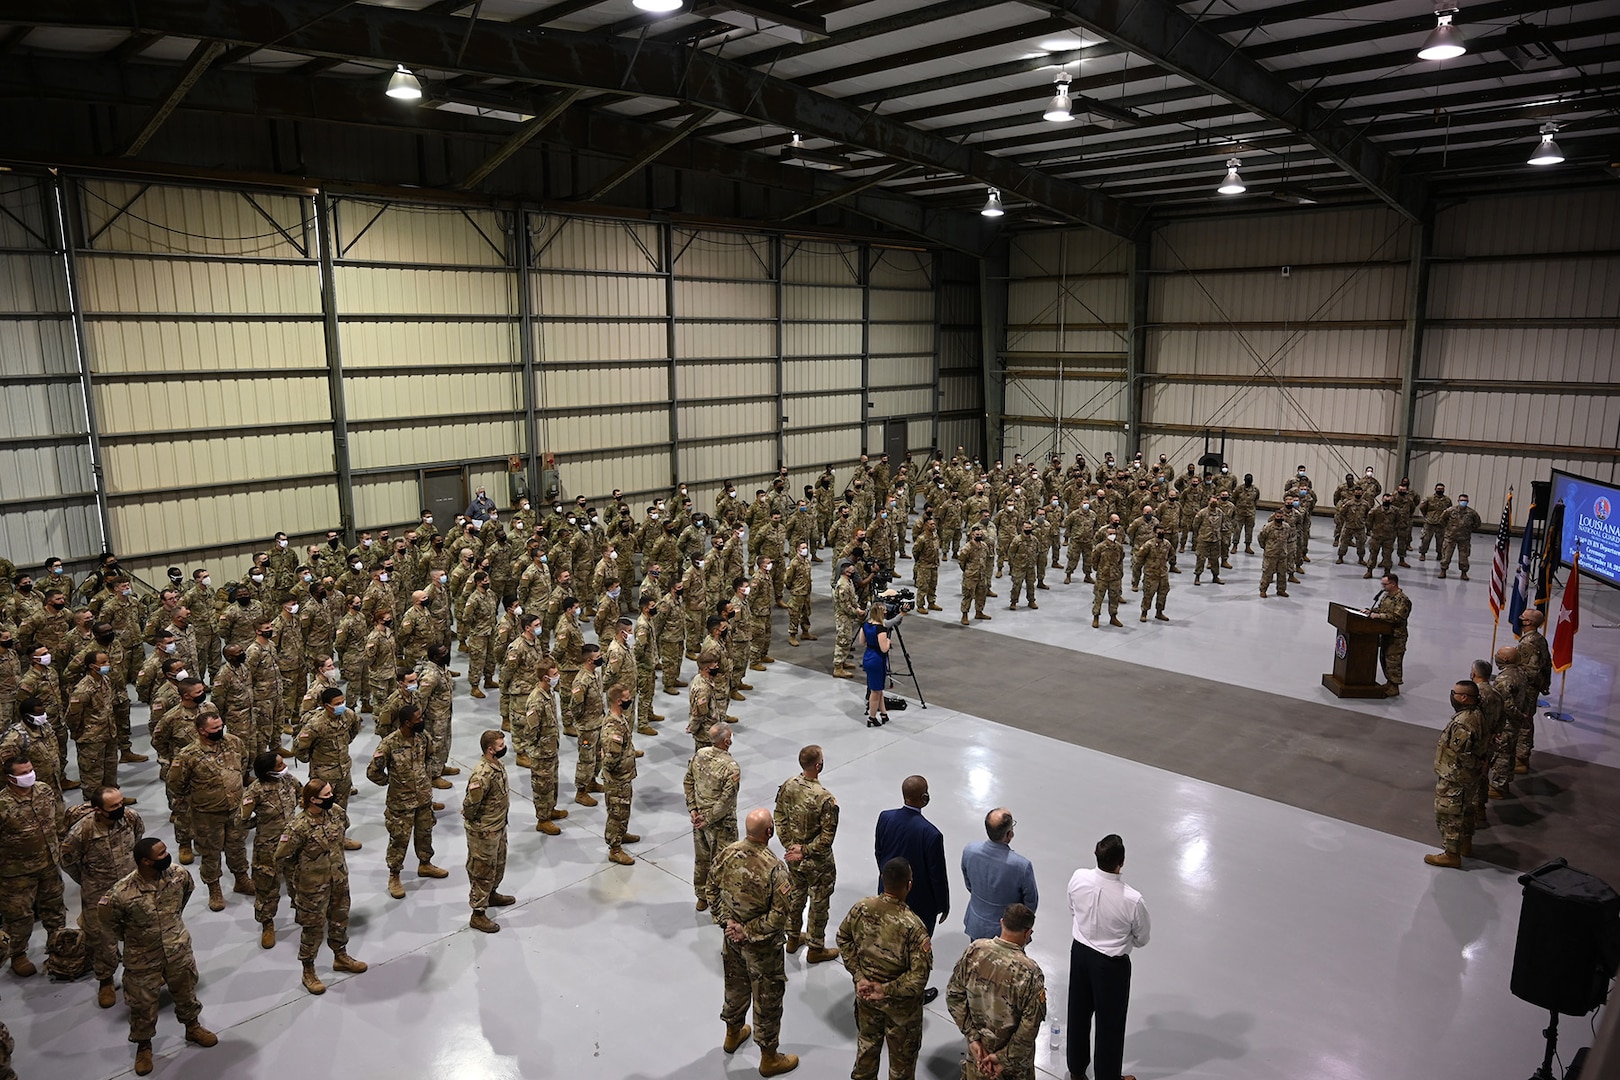 The Louisiana National Guard's 3rd Battalion of the 156th Infantry Regiment, 256th Infantry Brigade Combat Team, take part in their deployment ceremony in Lafayette, La., Nov. 10, 2020. This unit joins the approximately 2,000 Louisiana guardsmen deploying to the Middle East to support U.S. Central Command (CENTCOM) operations.